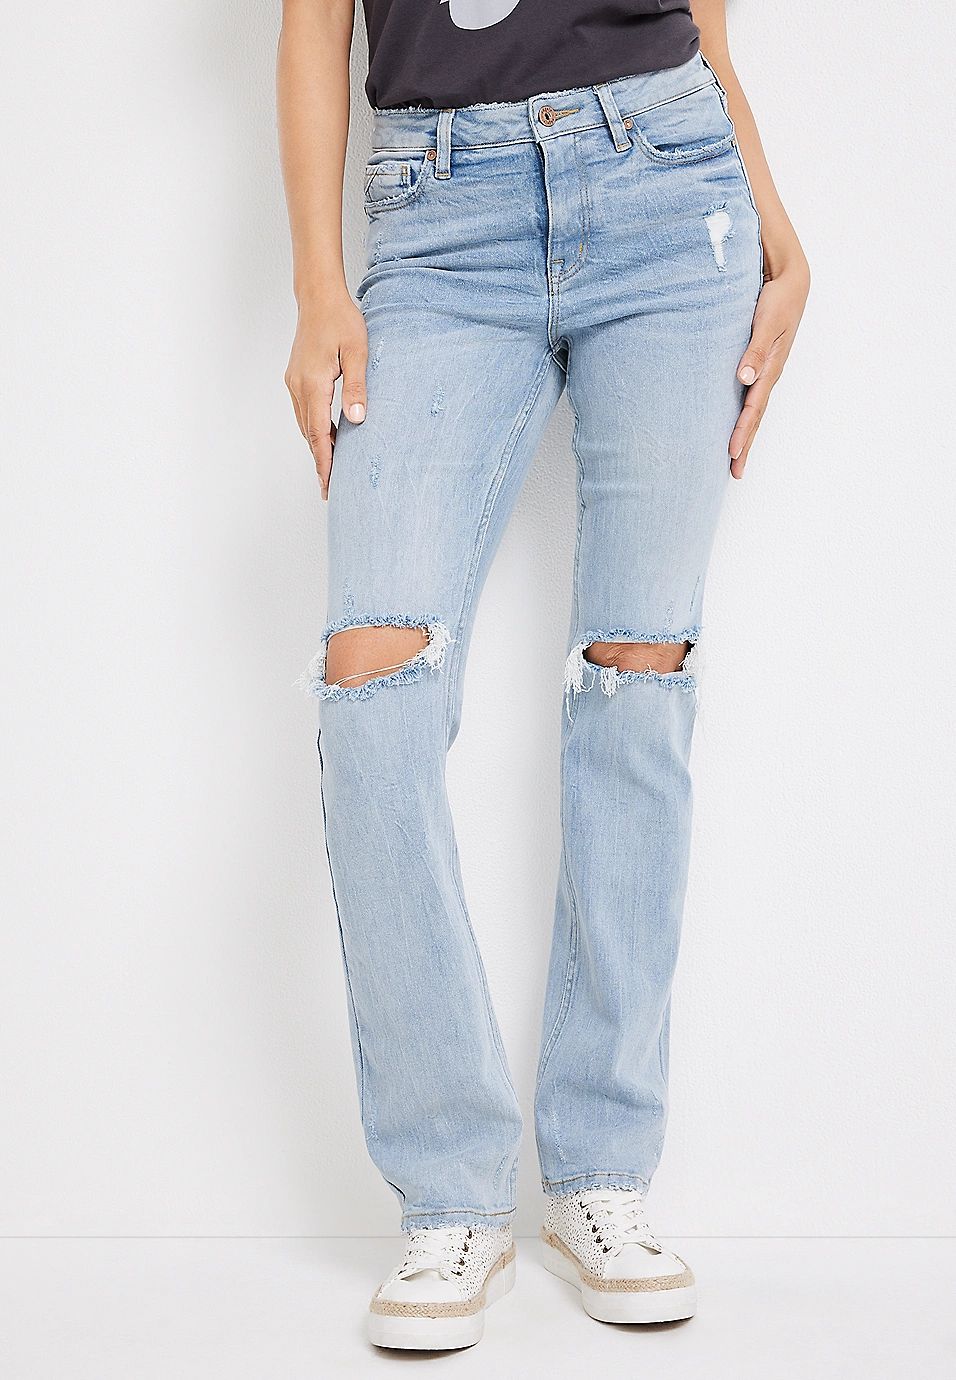 edgely™ Slim Boot High Rise Ripped Jean | Maurices